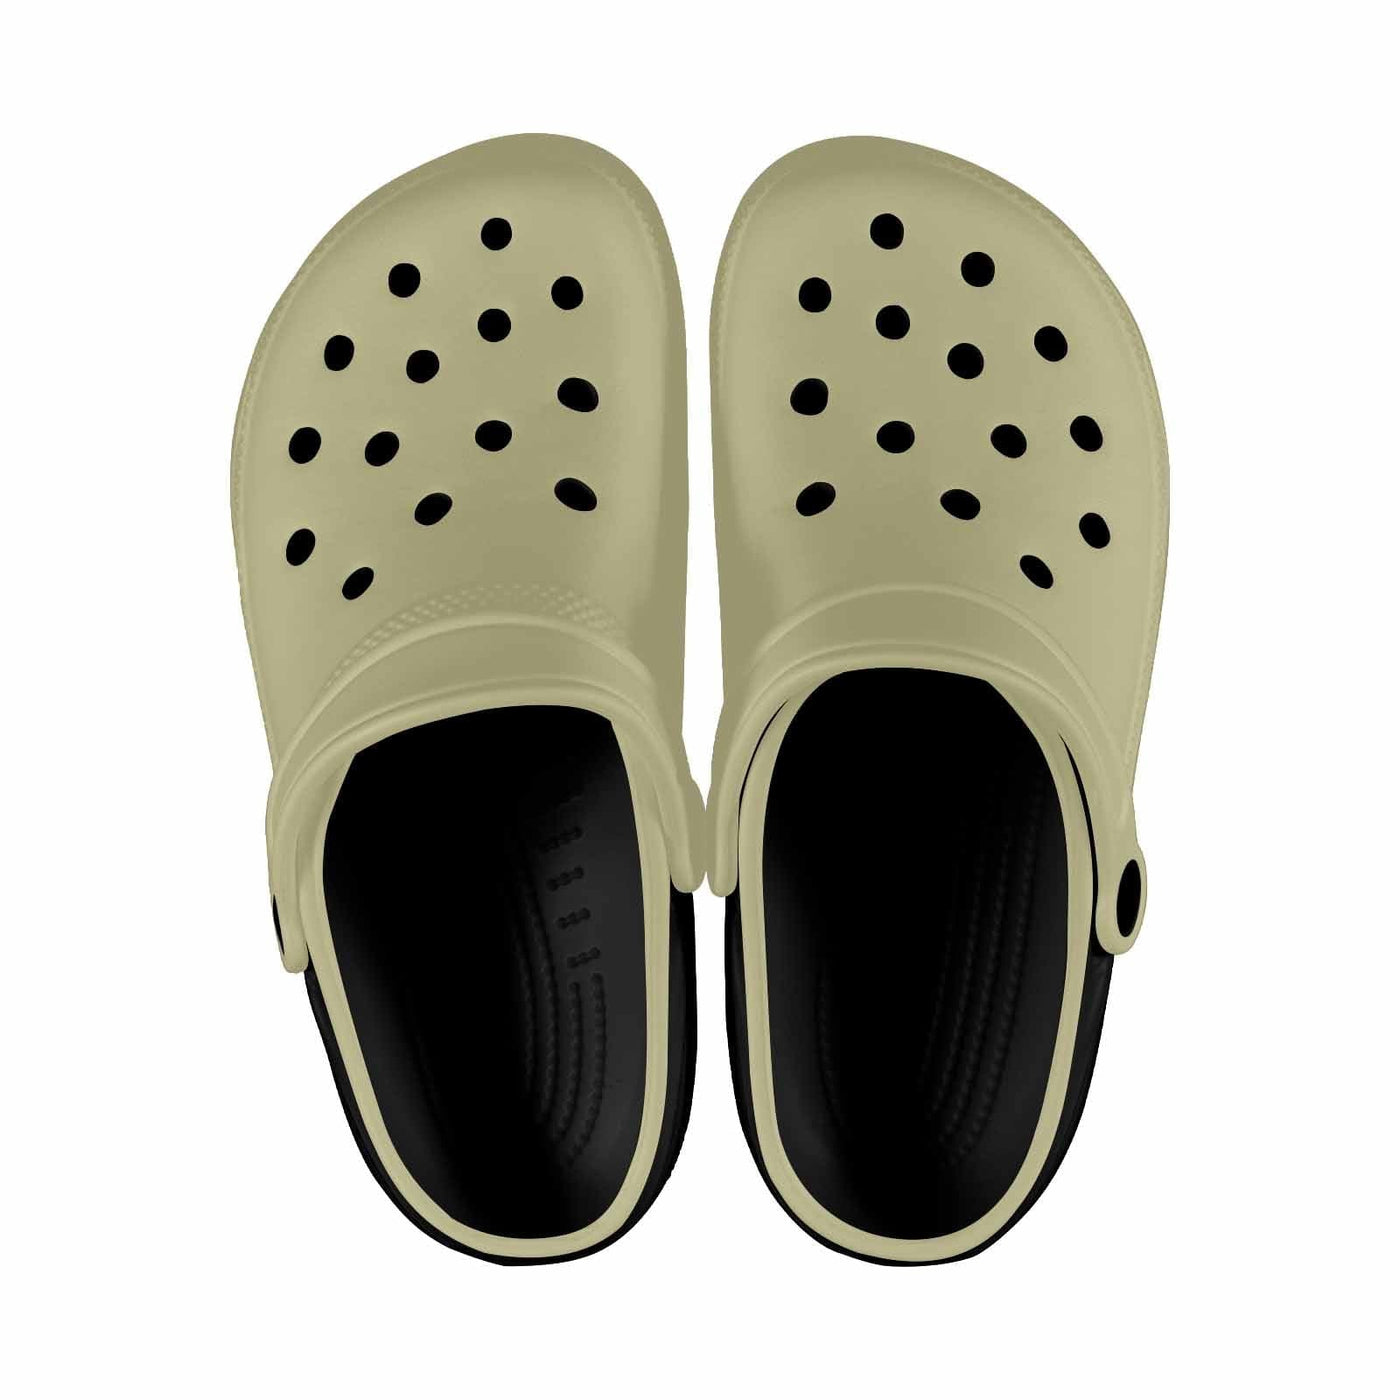 Sage Green Adult Clogs - Unisex | Clogs | Adults